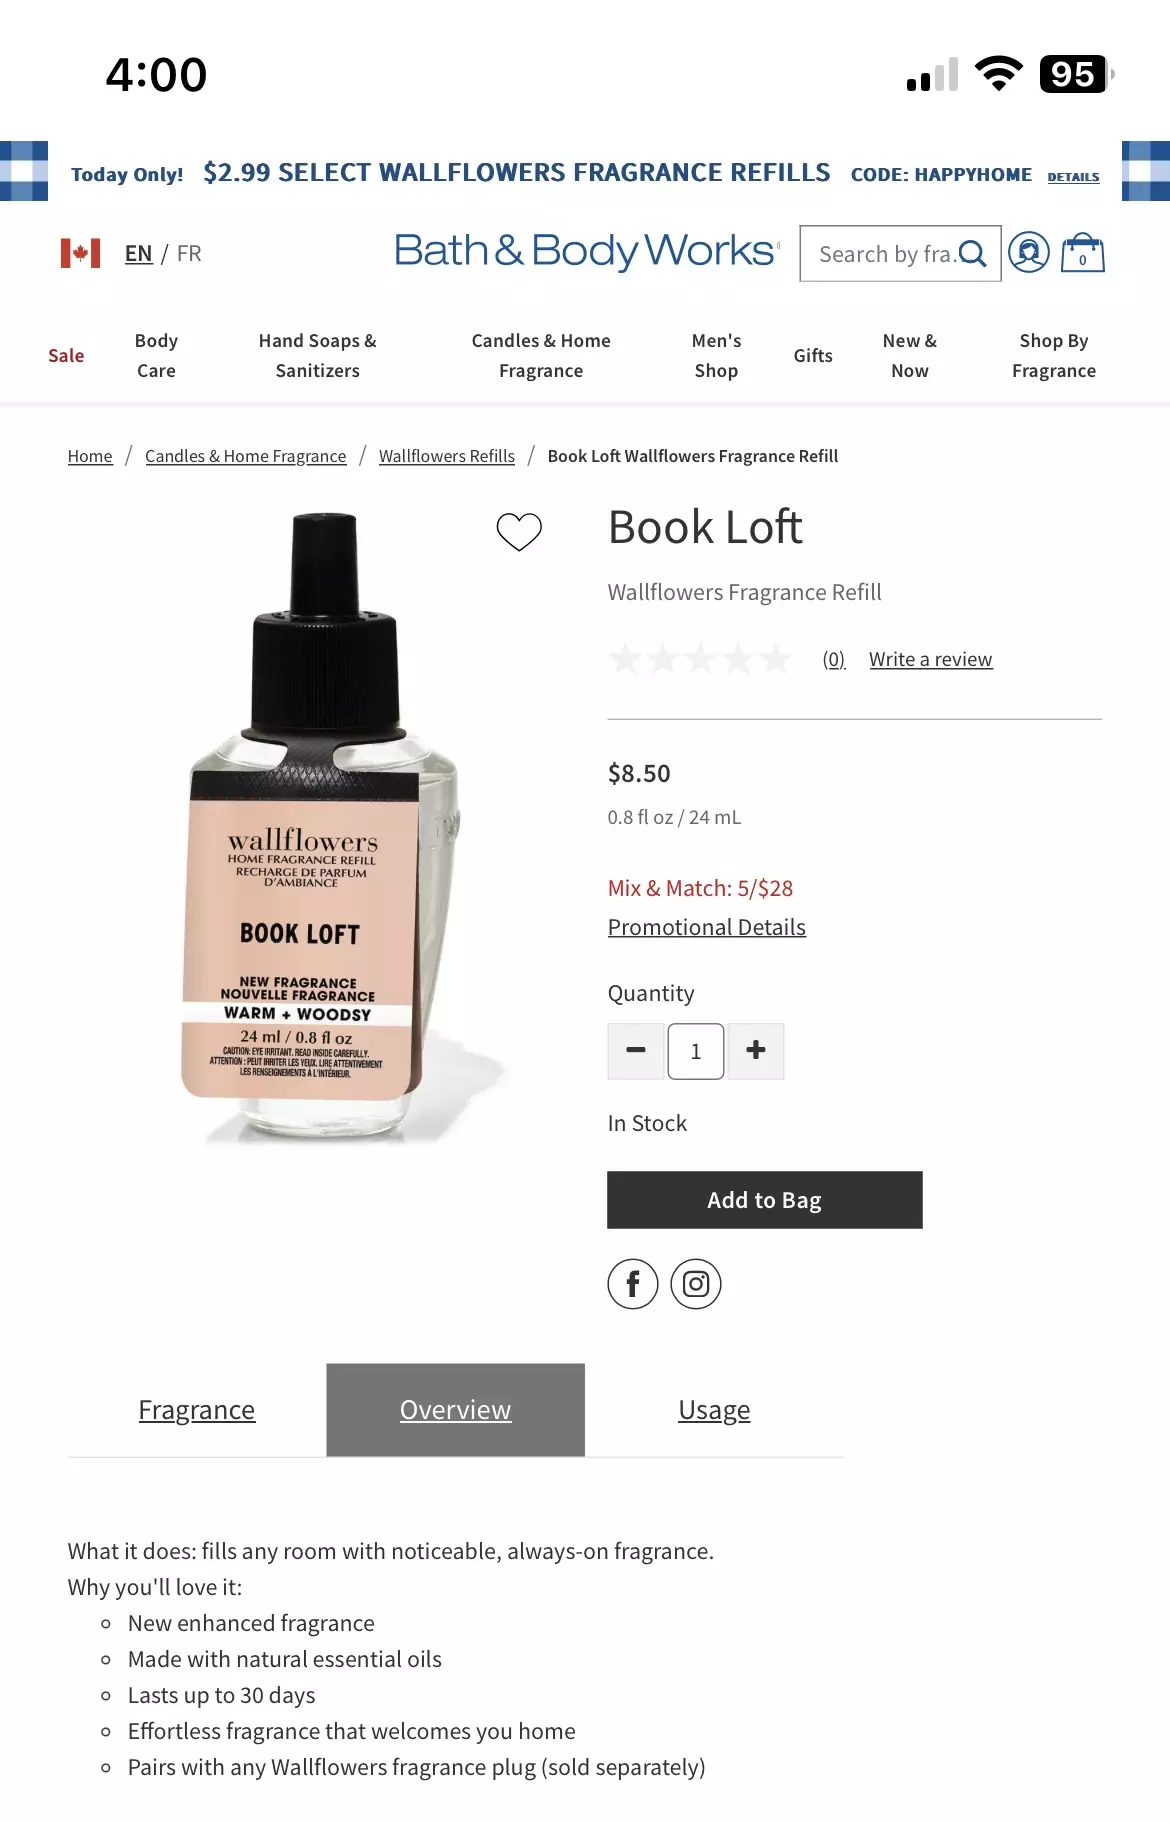 Book Loft Wallflower - First online at Bath and Body Works England.